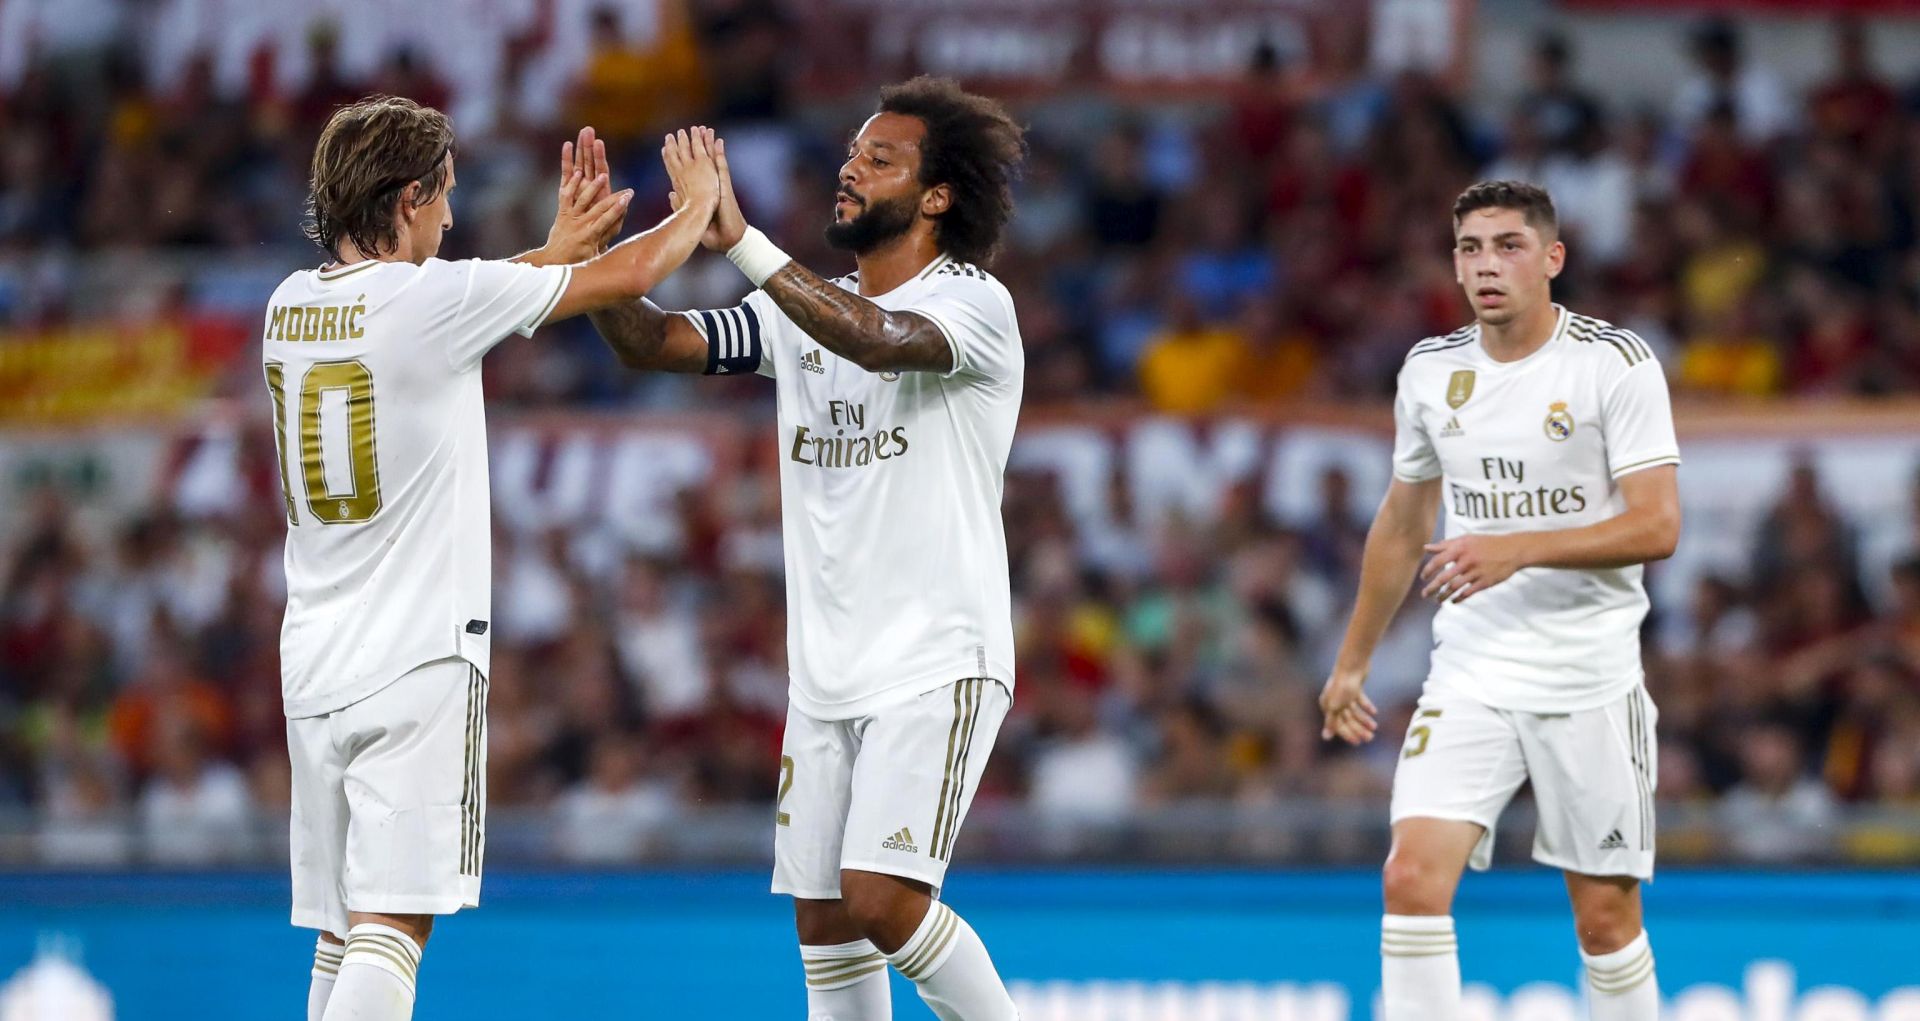 epa07768781 Real Madrid's Marcelo (C) jubilates with his teammate Luka Modric (L) after scoring the 0-1 goal during the international friendly soccer match AS Roma vs Real Madrid CF at Olimpico stadium in Rome, Italy, 11 August 2019.  EPA/ANGELO CARCONI